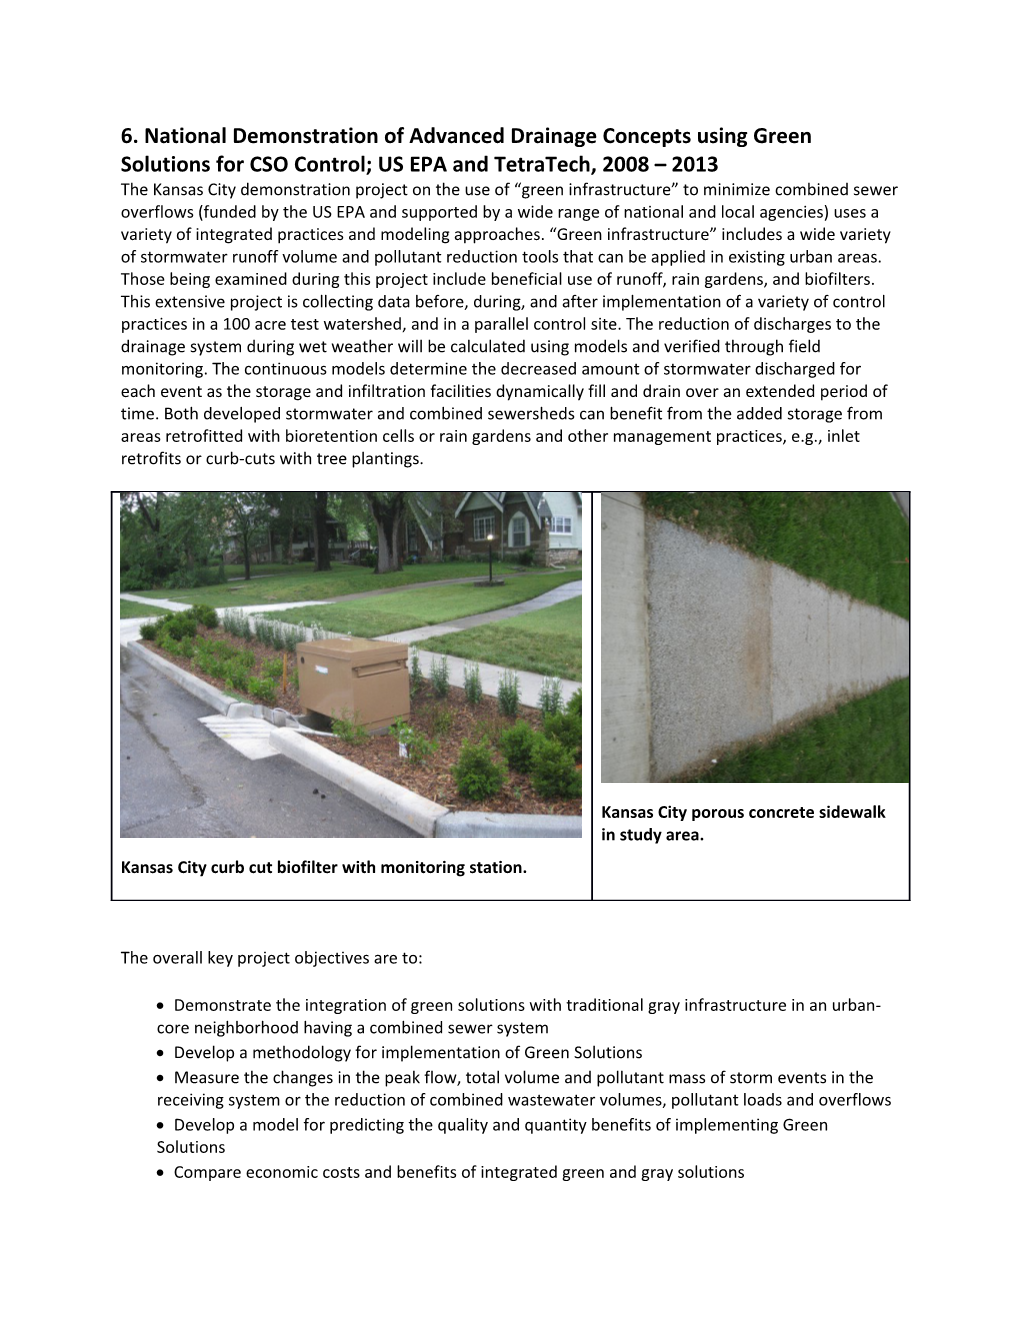 6. National Demonstration of Advanced Drainage Concepts Using Green Solutions for CSO